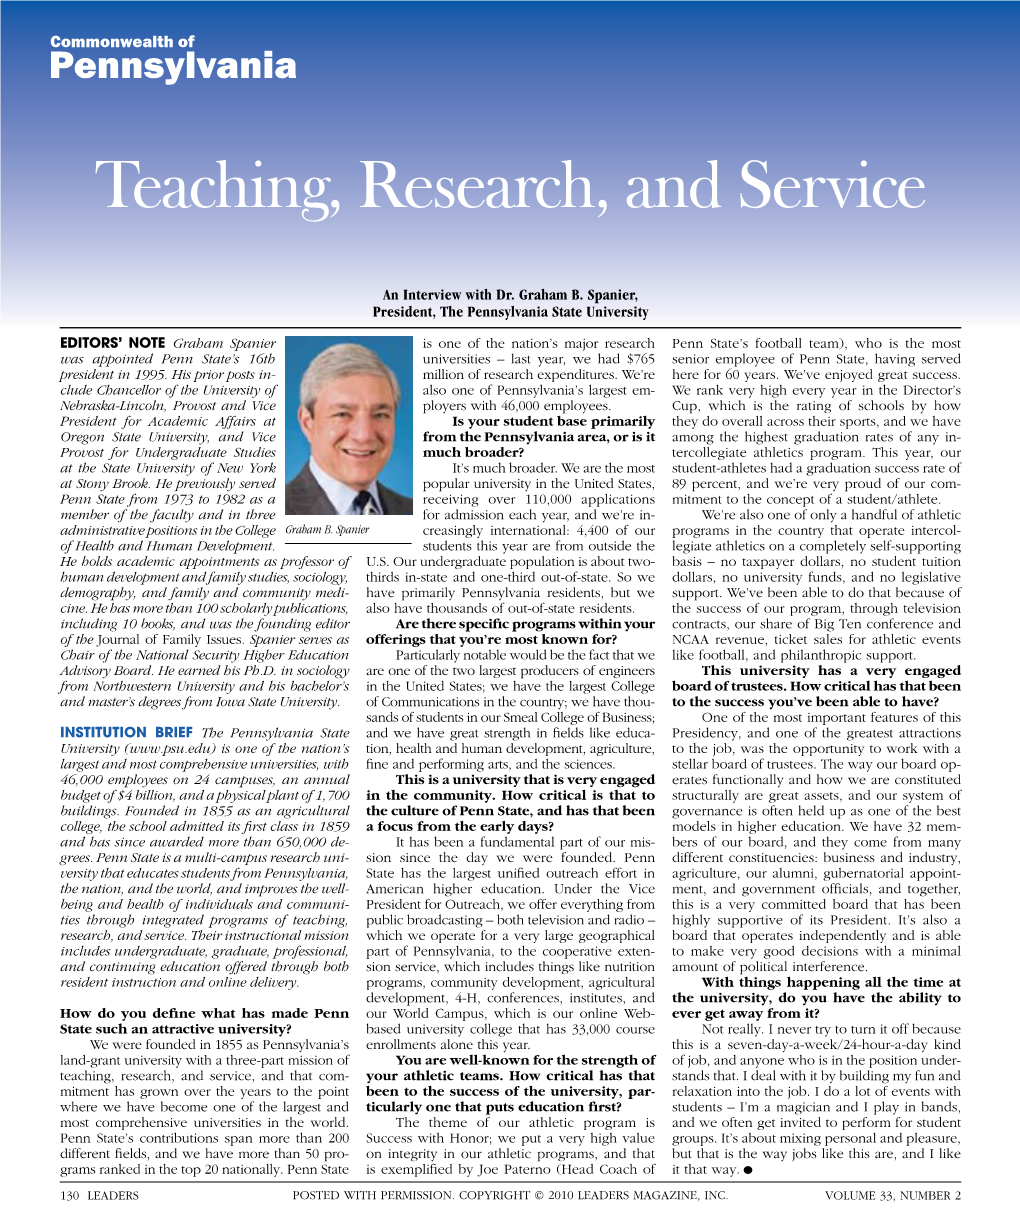 Teaching, Research, and Service